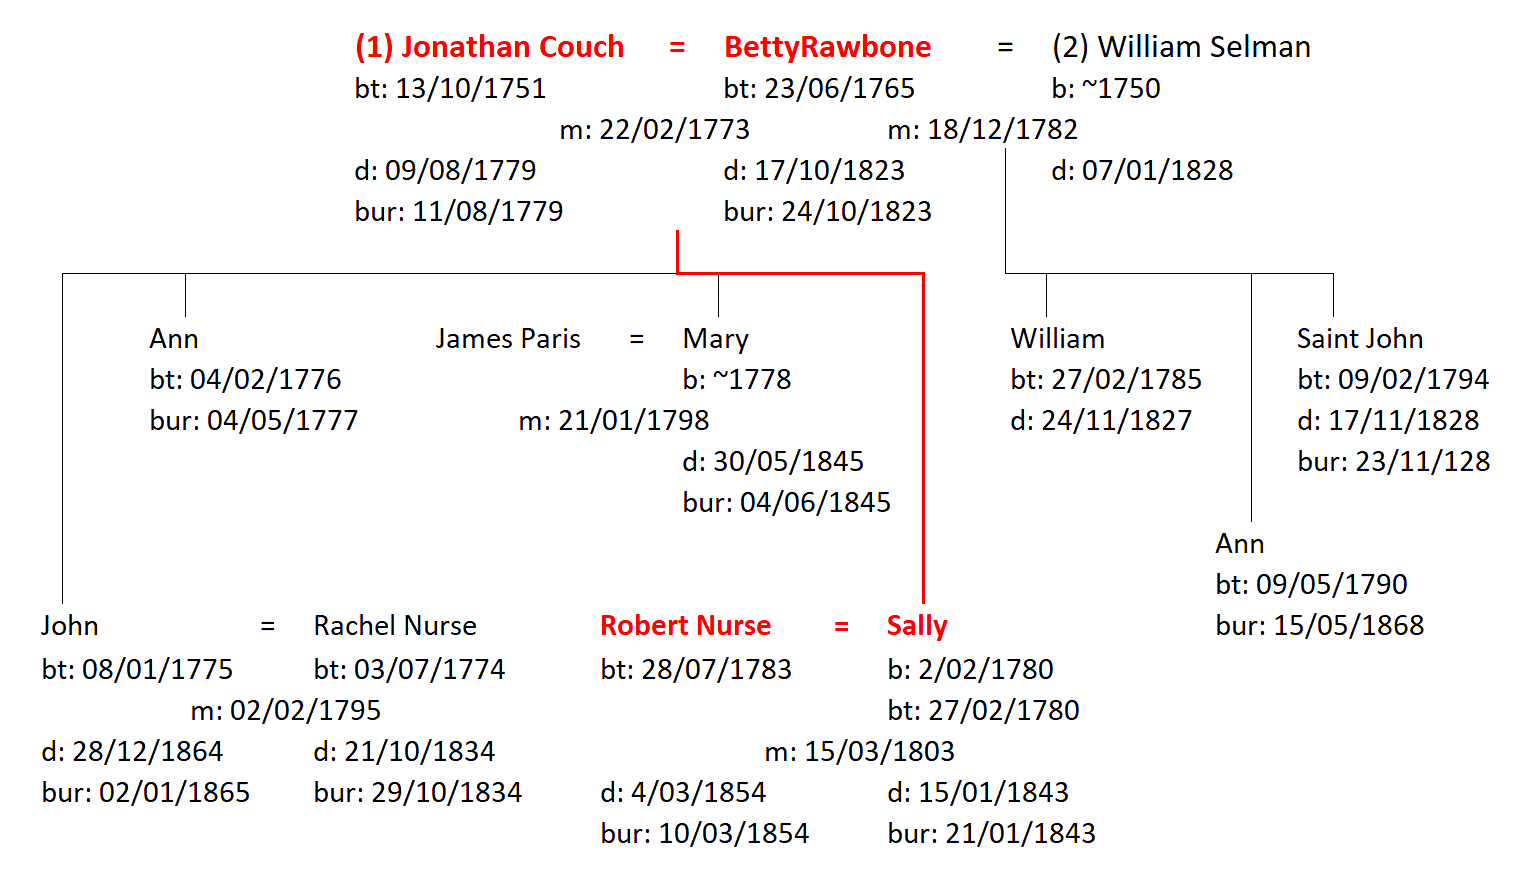 Figure 2: The Family of Jonathan and Betty Couch